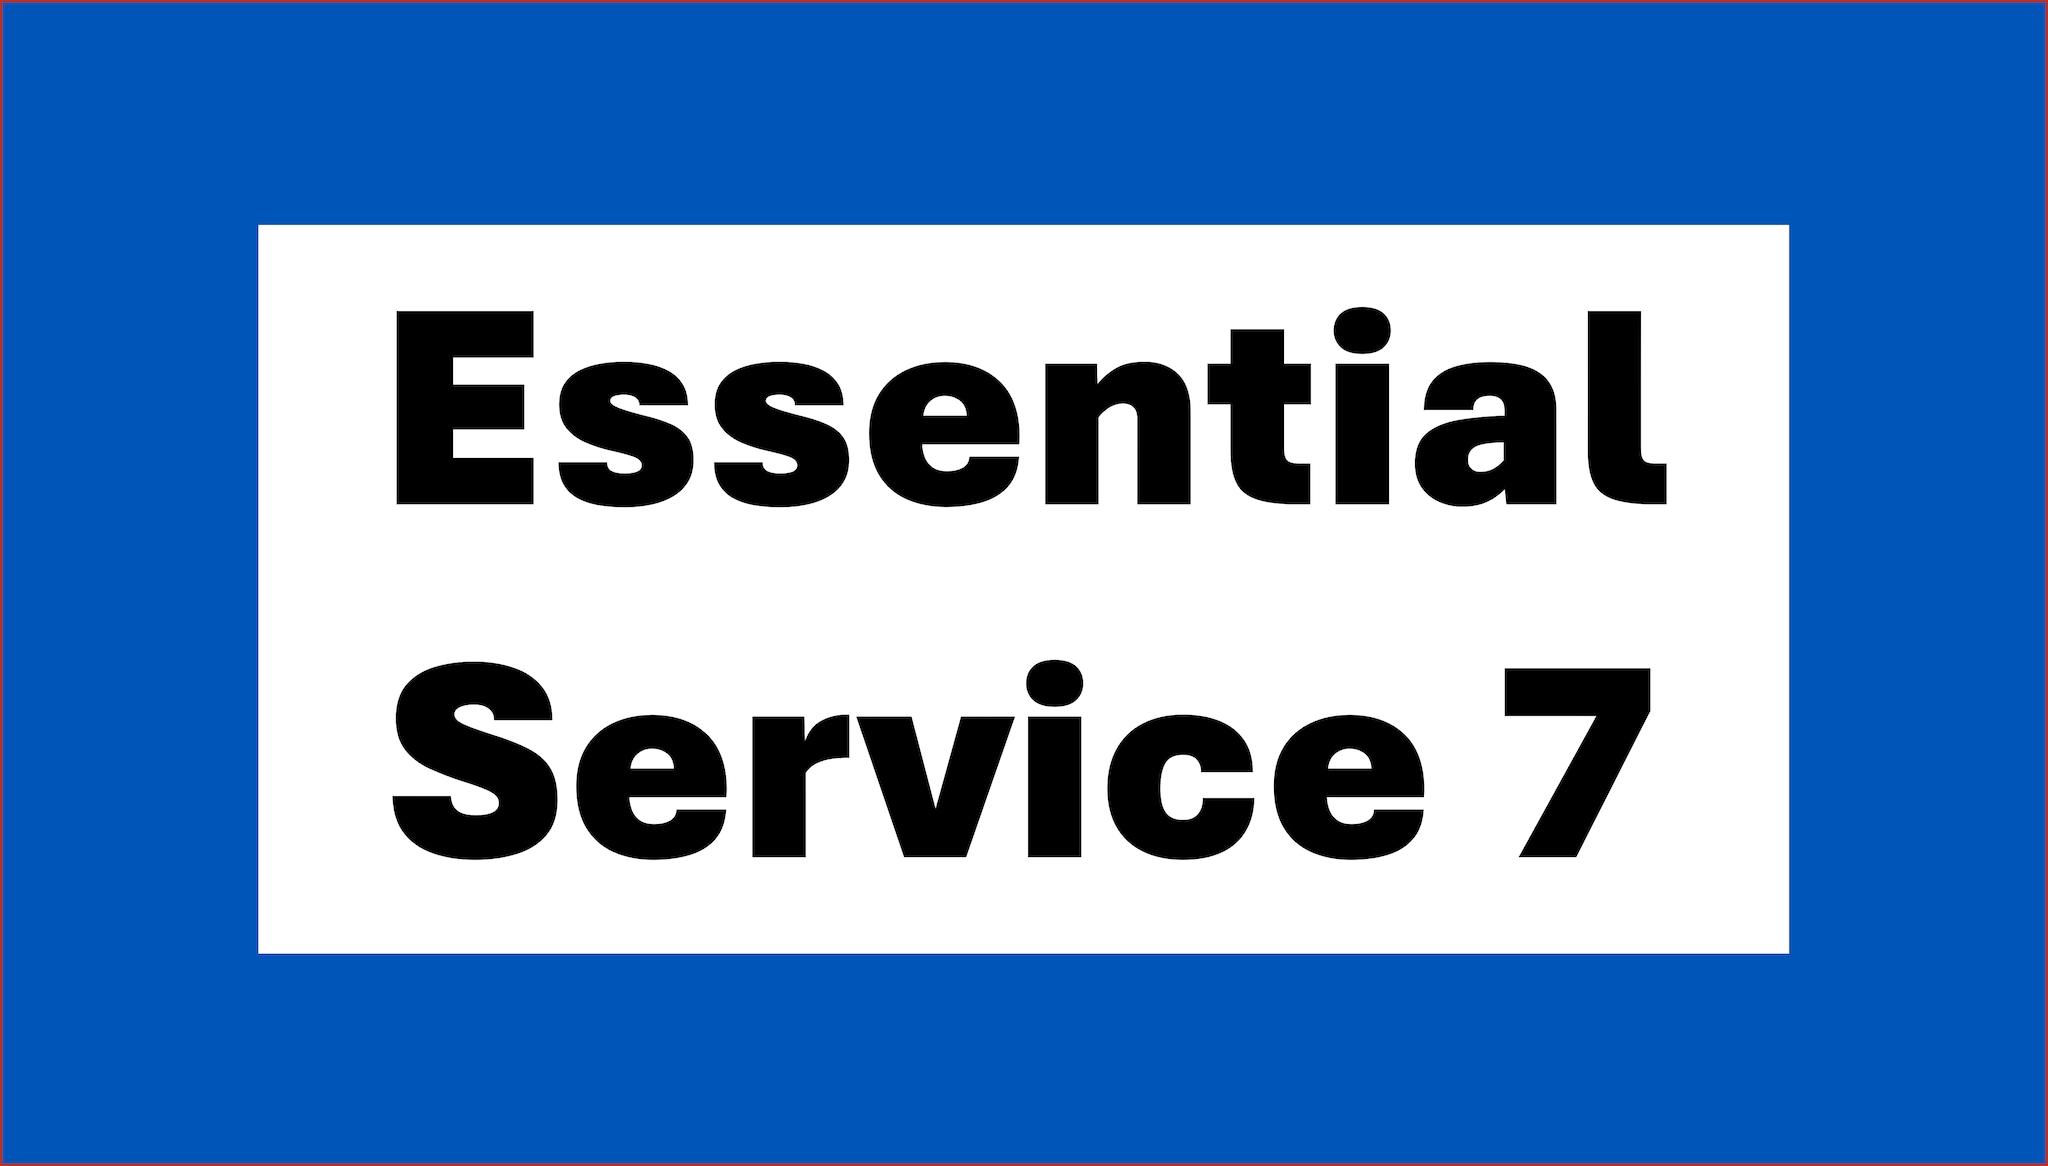 Blue graphic with black text in white box reading Essential Service 7